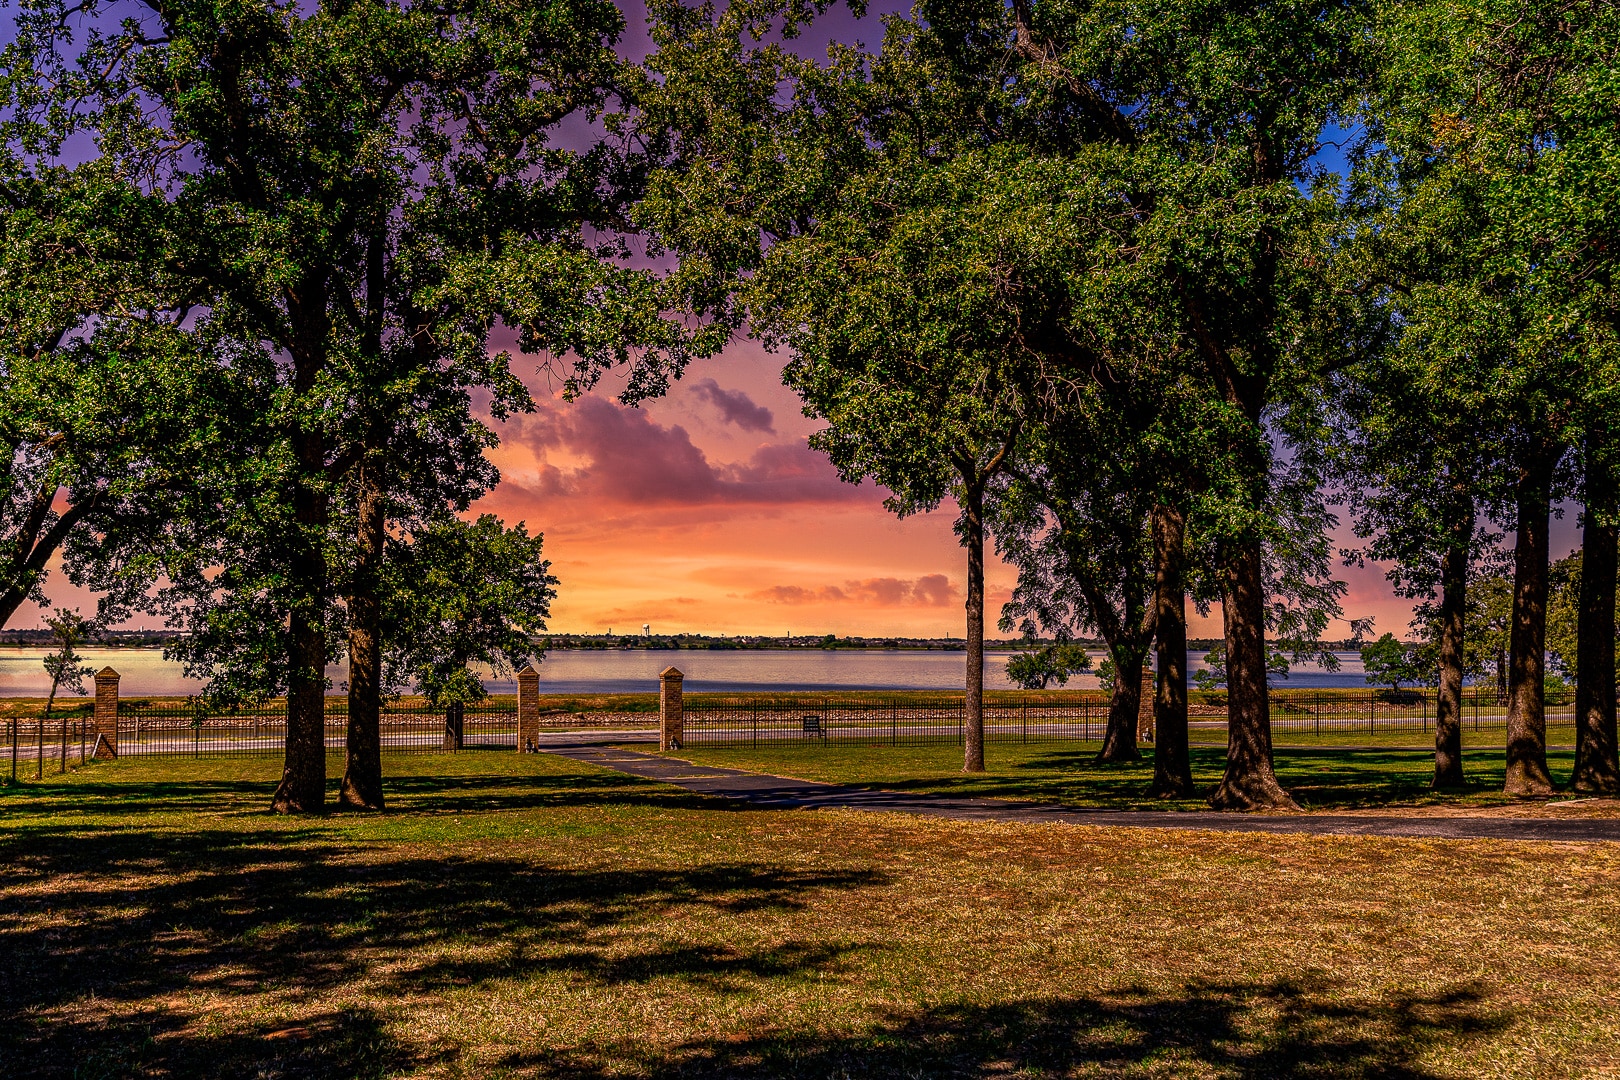 This 'lake-view' home will soon become your 'happy place.' This ranch-style home is on 1.5 acres directly in front of Lake Overholser. First impressions count! You'll be impressed with the curb appeal as soon as you drive up. There's a wide, covered front porch where you can sit and enjoy the amazing views of spectacular sunsets on the lake. The large living room has a great view of the lake and a cozy fireplace. You'll appreciate the new luxury vinyl plank flooring in the main living areas. The kitchen has been updated with quartz counters. The large enclosed porch in the back adds lots of extra living space. Off the master suite, there's a large 16x16' deck for enjoying the private backyard. There's also a two-car garage plus a detached four-car garage or shop with spray foam insulation, sheetrock walls, and an overhead heater &amp; window cooling. You'll feel like you're in the country but have quick access to Bethany, Yukon, and the turnpike.